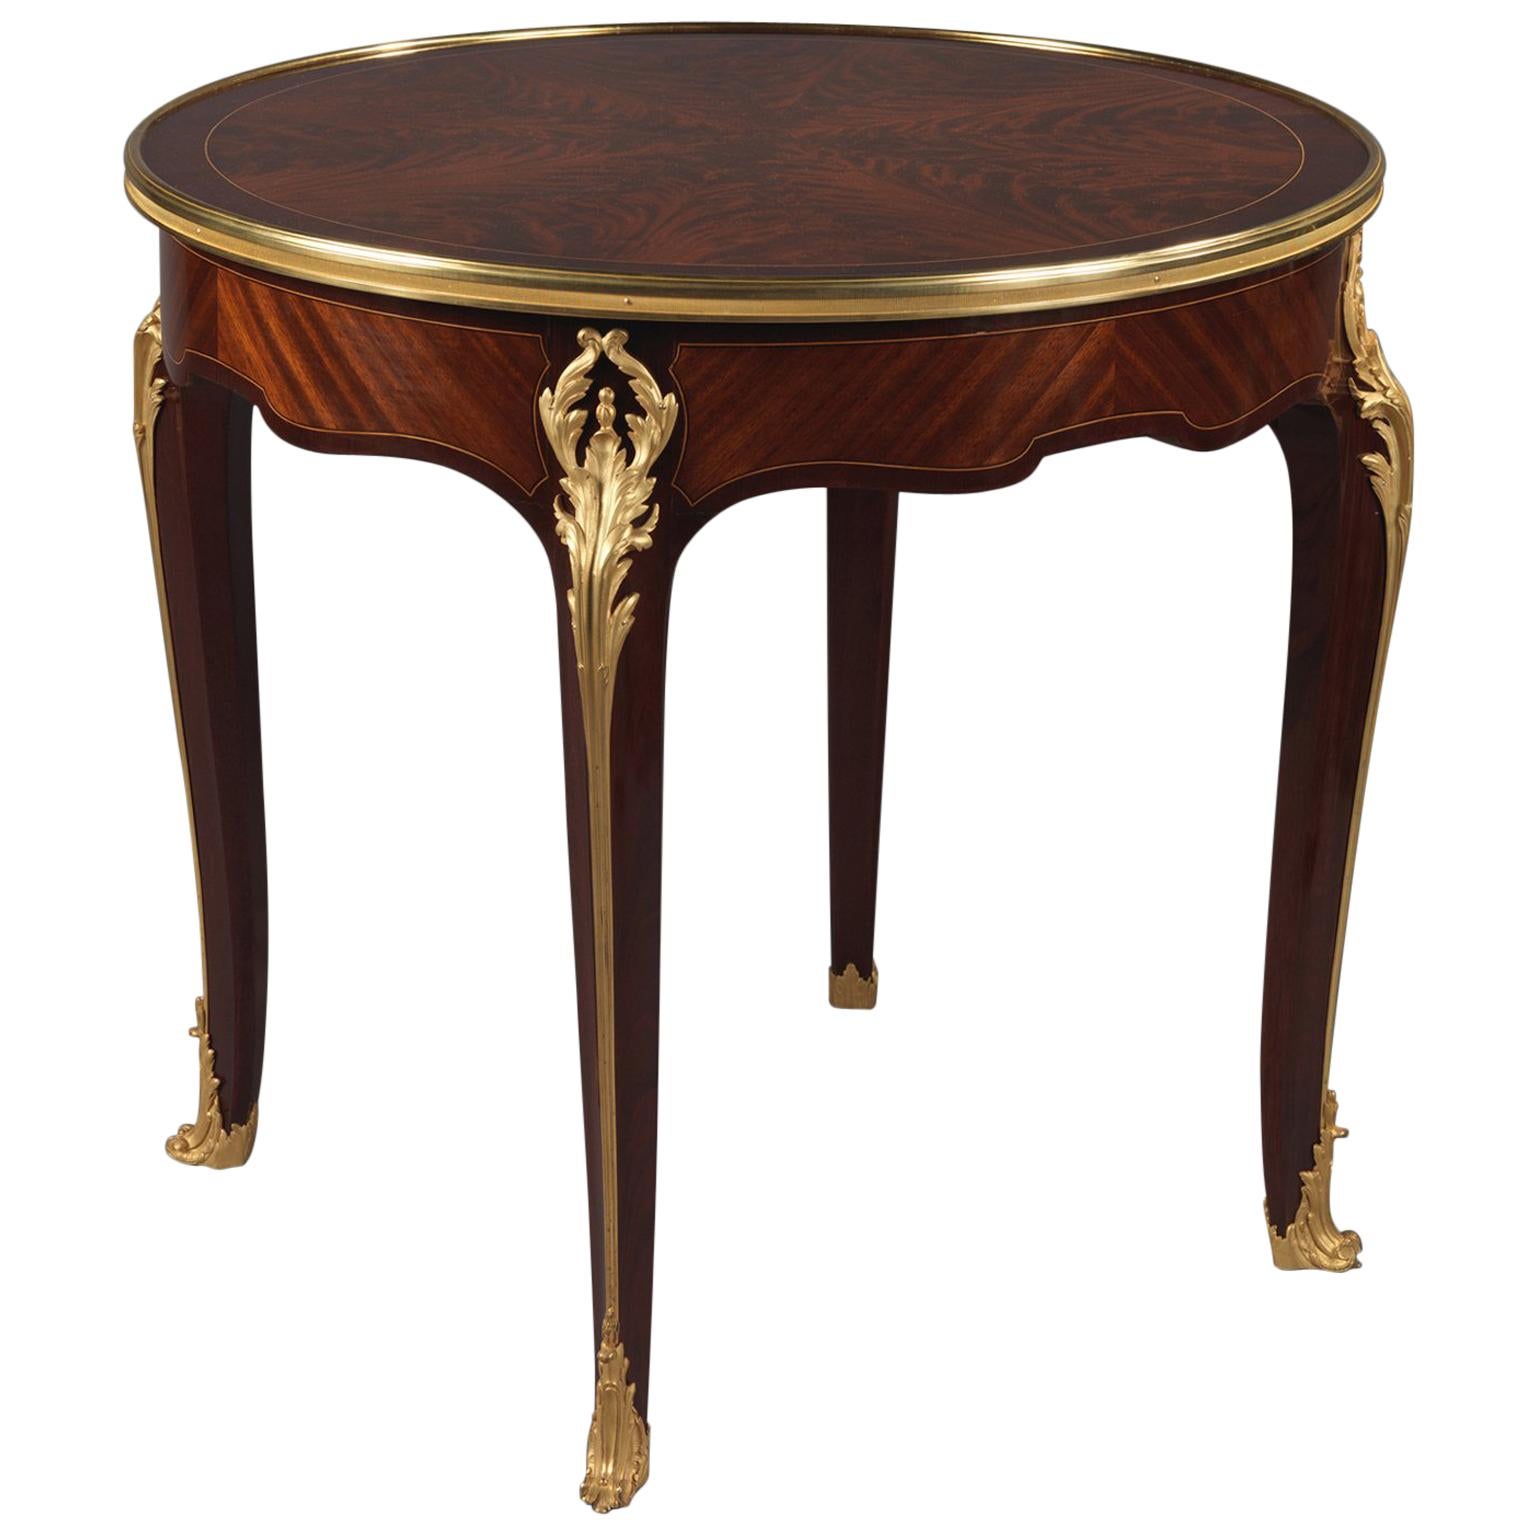 Flame Mahogany Gueridon with a Reversible Baise Lined Top, circa 1890